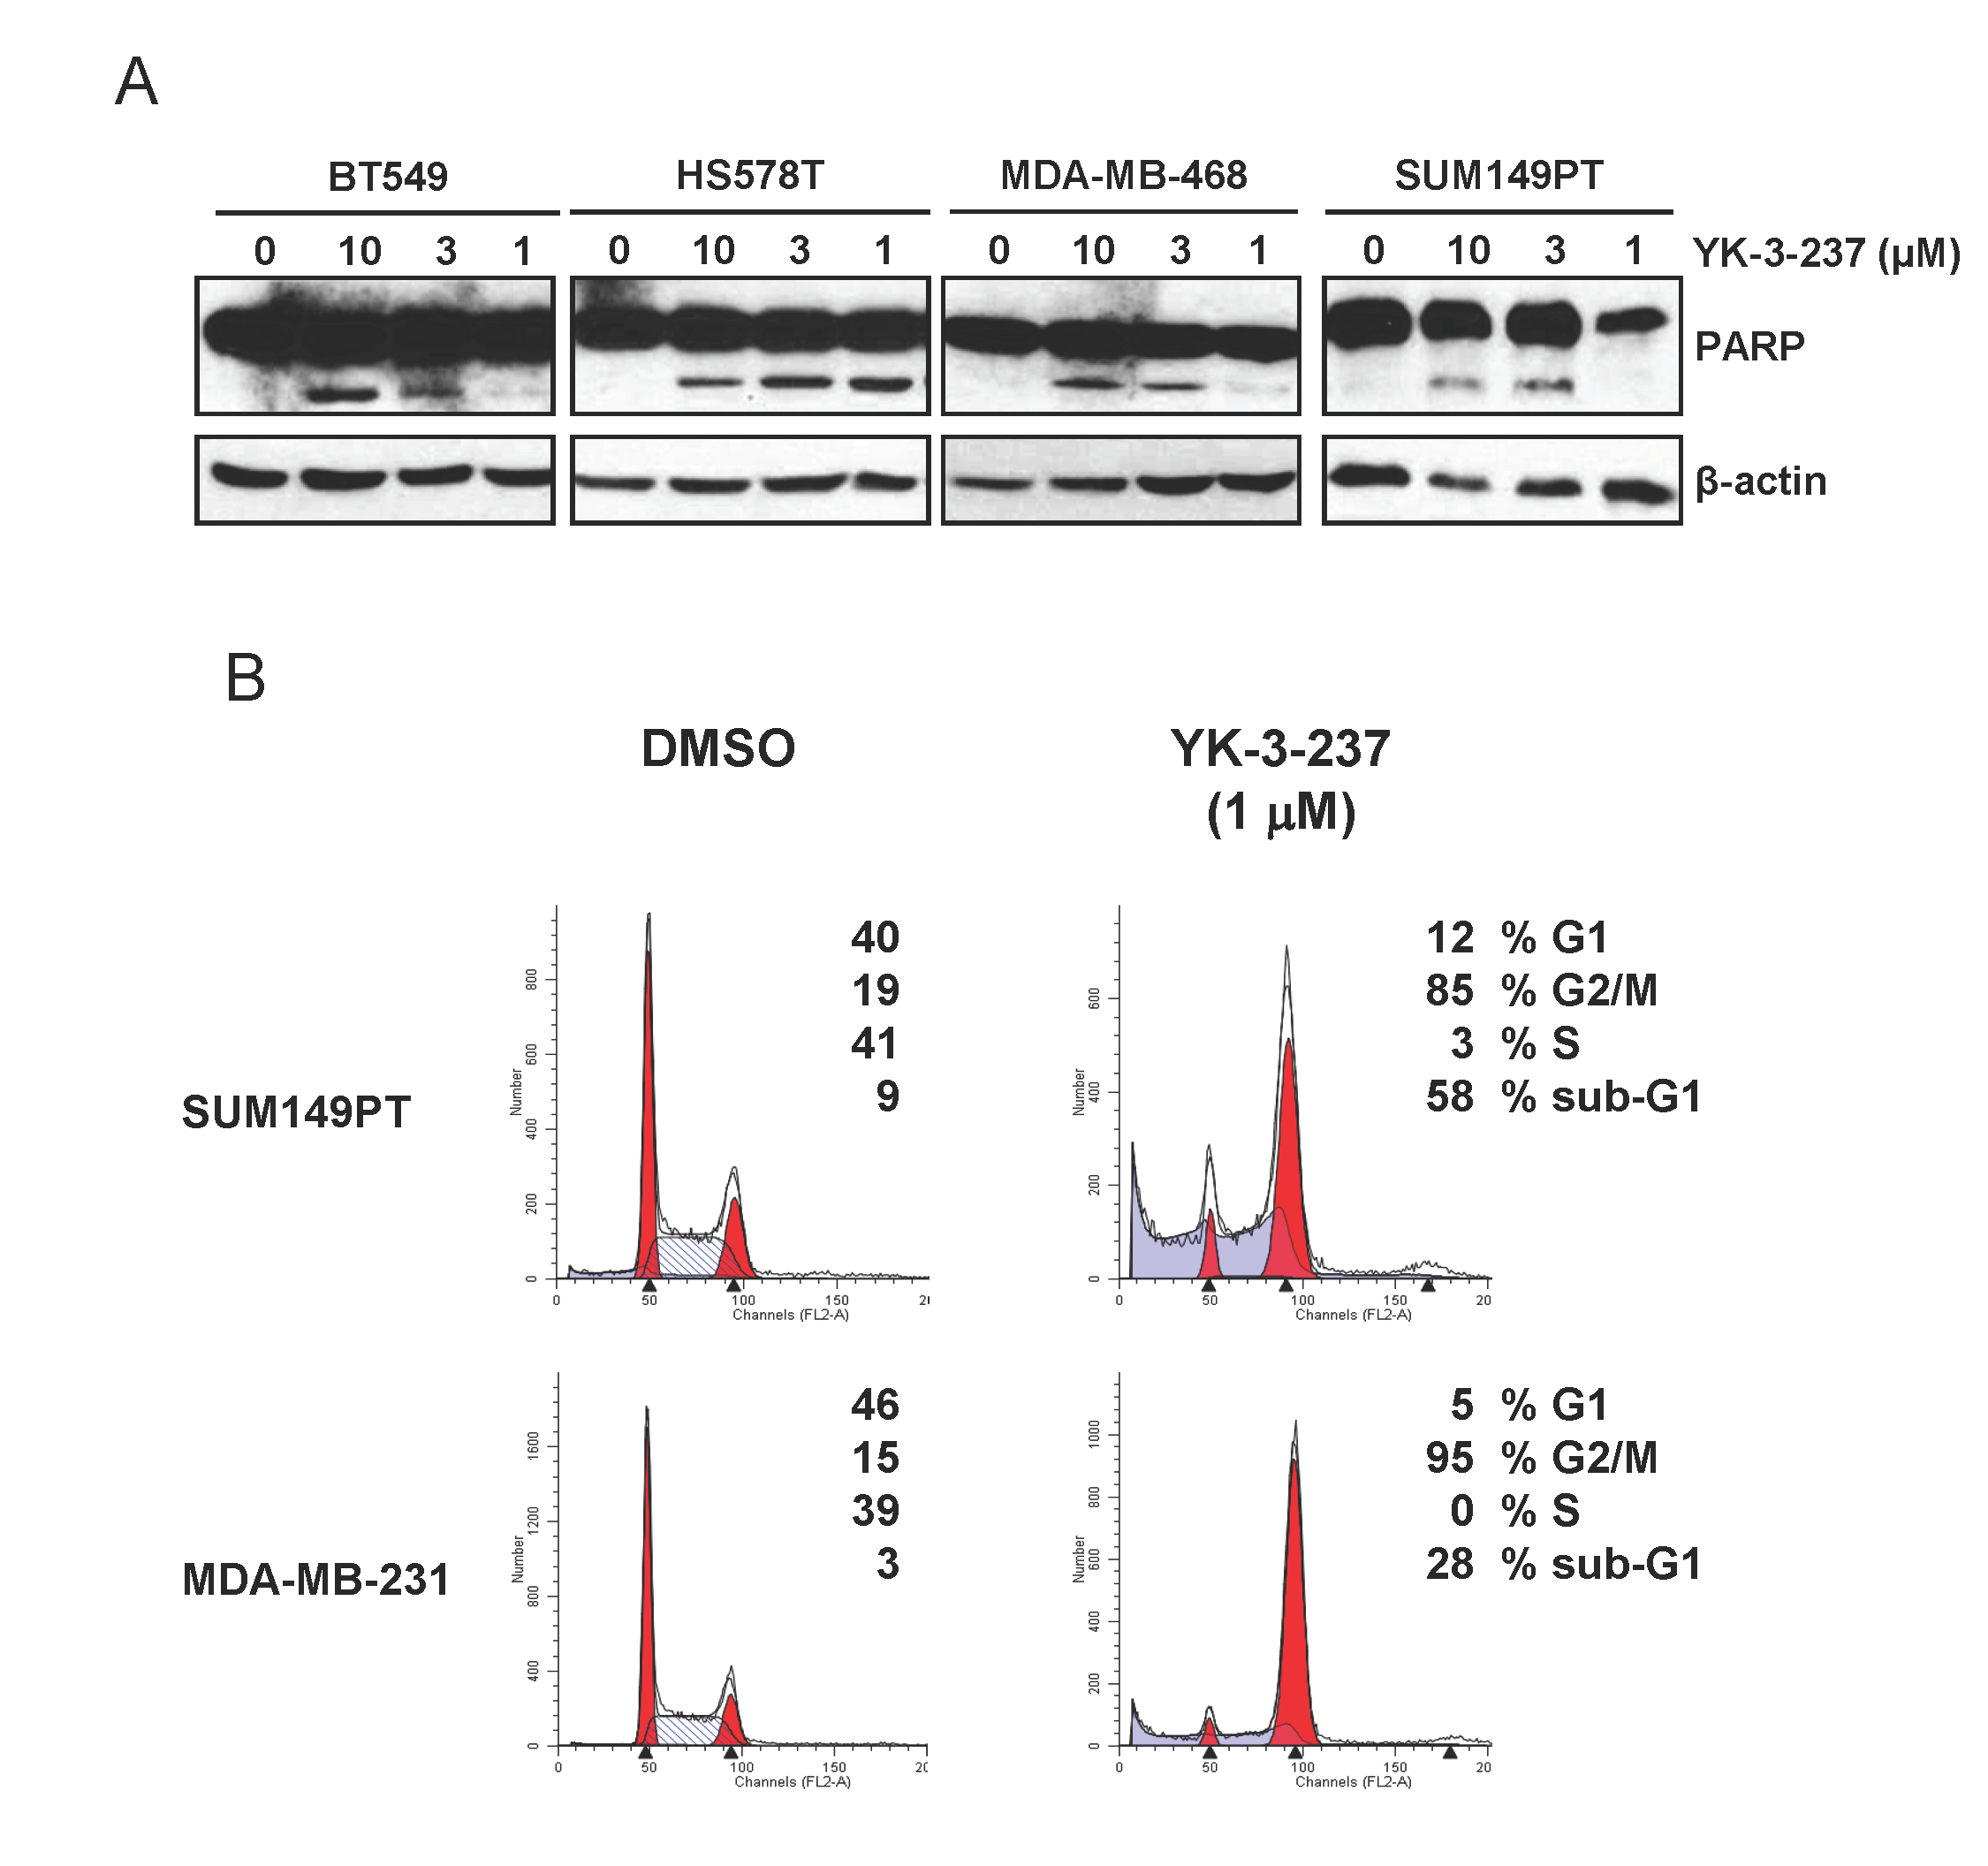 Induction of apoptotic cell death and G2/M arrest by YK-3-237 in TNBC cell lines.